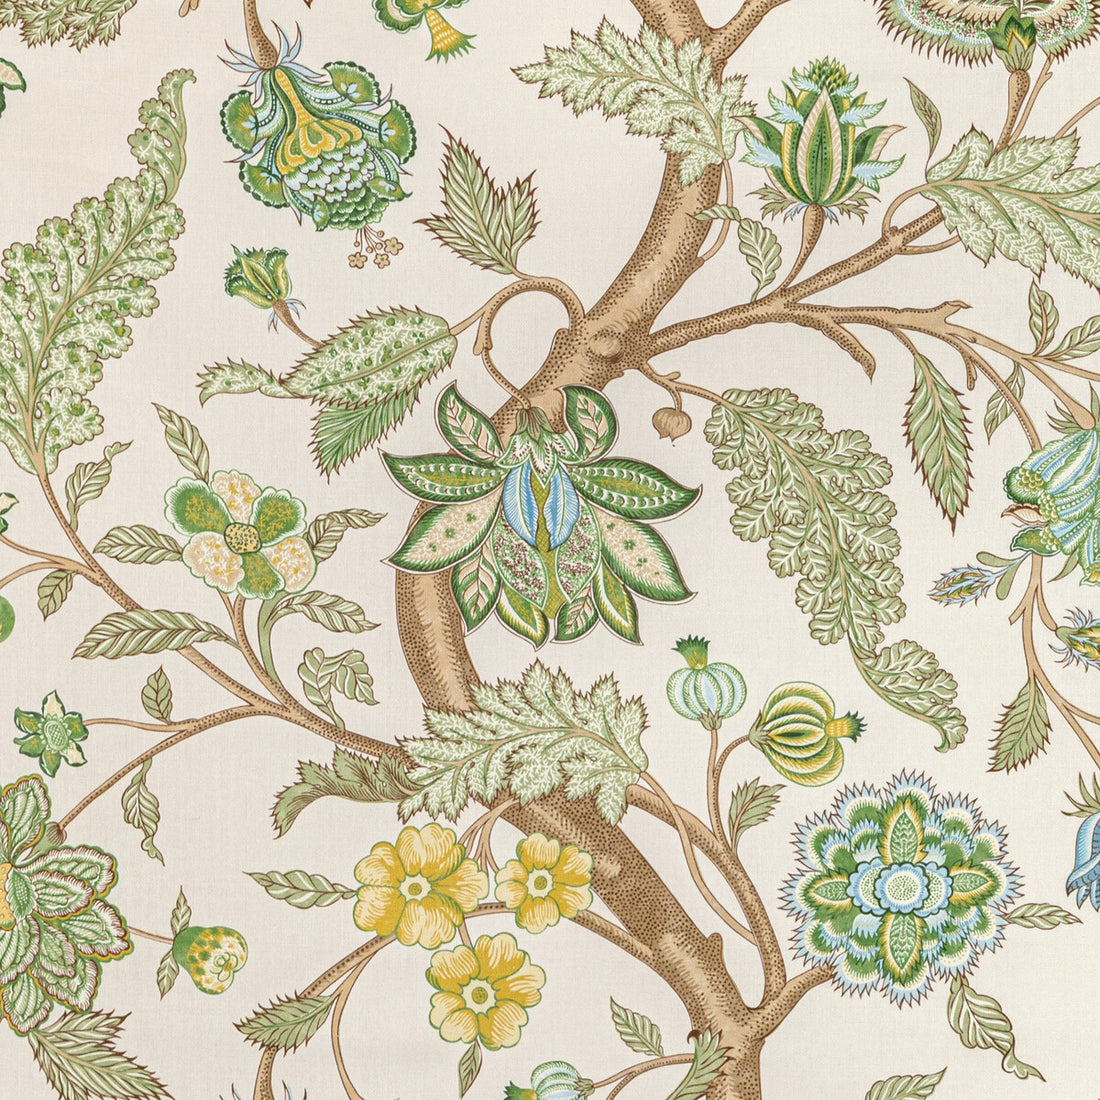 Palampore Print fabric in spring color - pattern 2022109.3.0 - by Lee Jofa in the Sarah Bartholomew collection